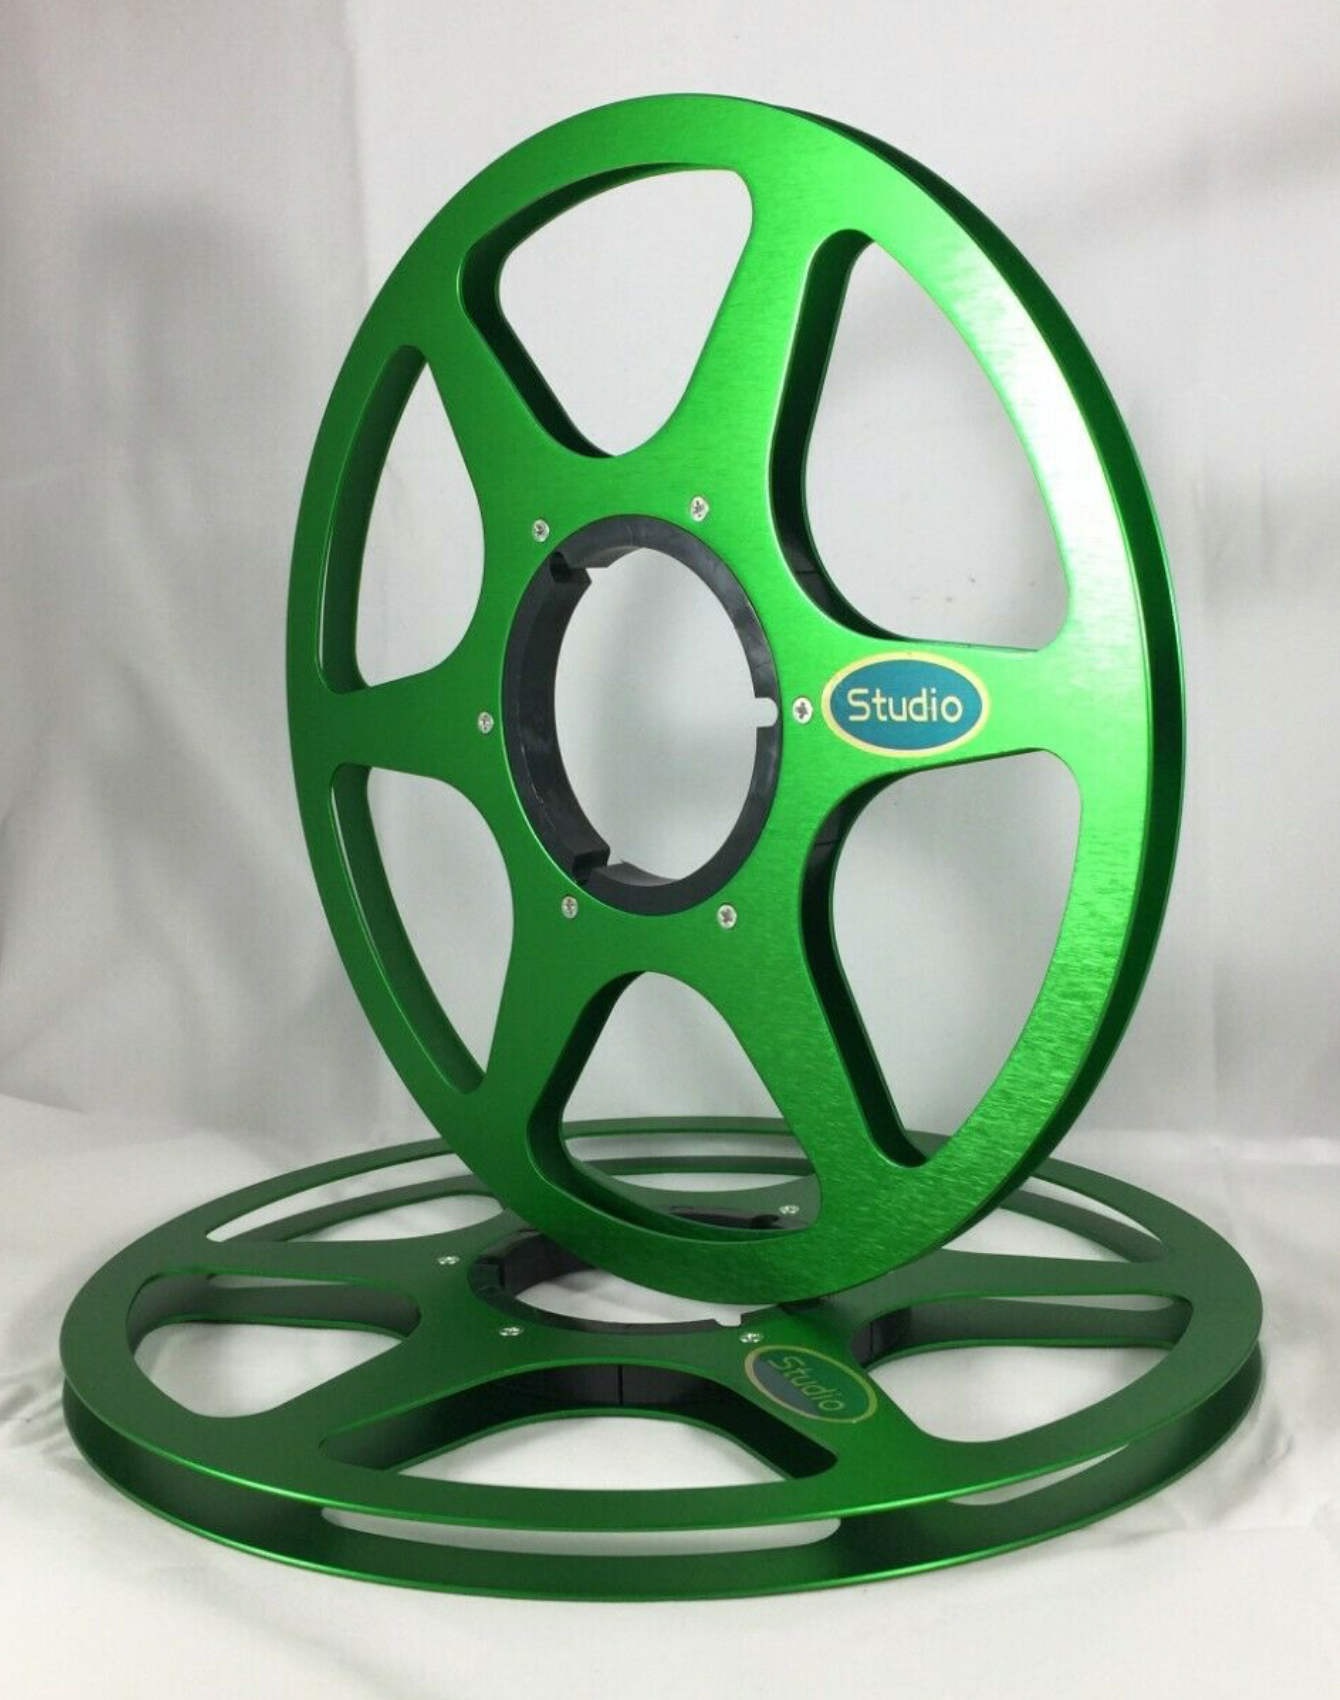 10.5" Anodized Aluminum metal Reel to Reels - ONE PAIR - Green